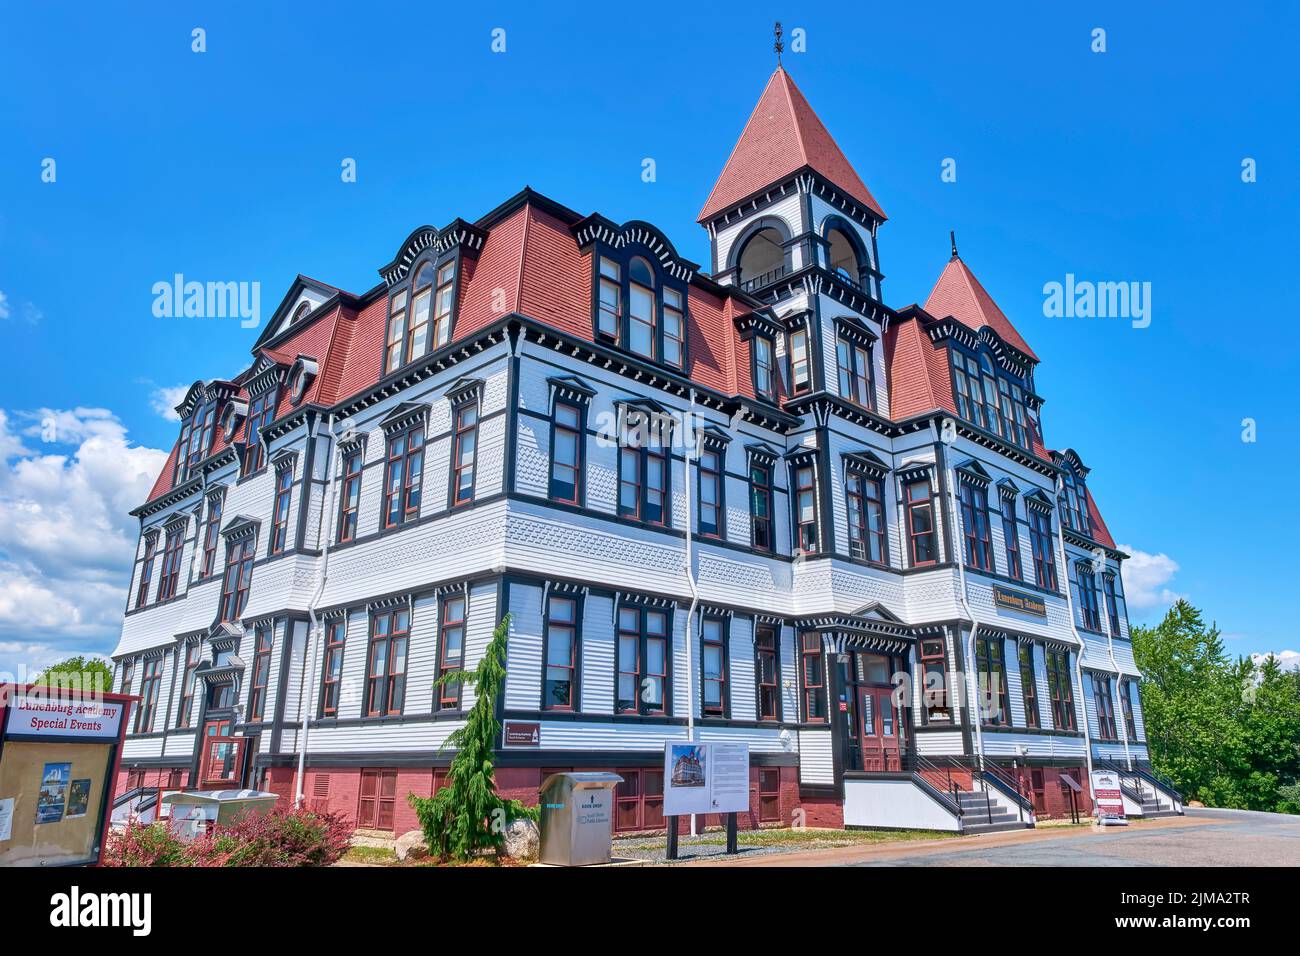 The Lunenburg Academy is a historic school building built in 1885 and is designated a National Historic site.  It is built in the Second Empire archit Stock Photo